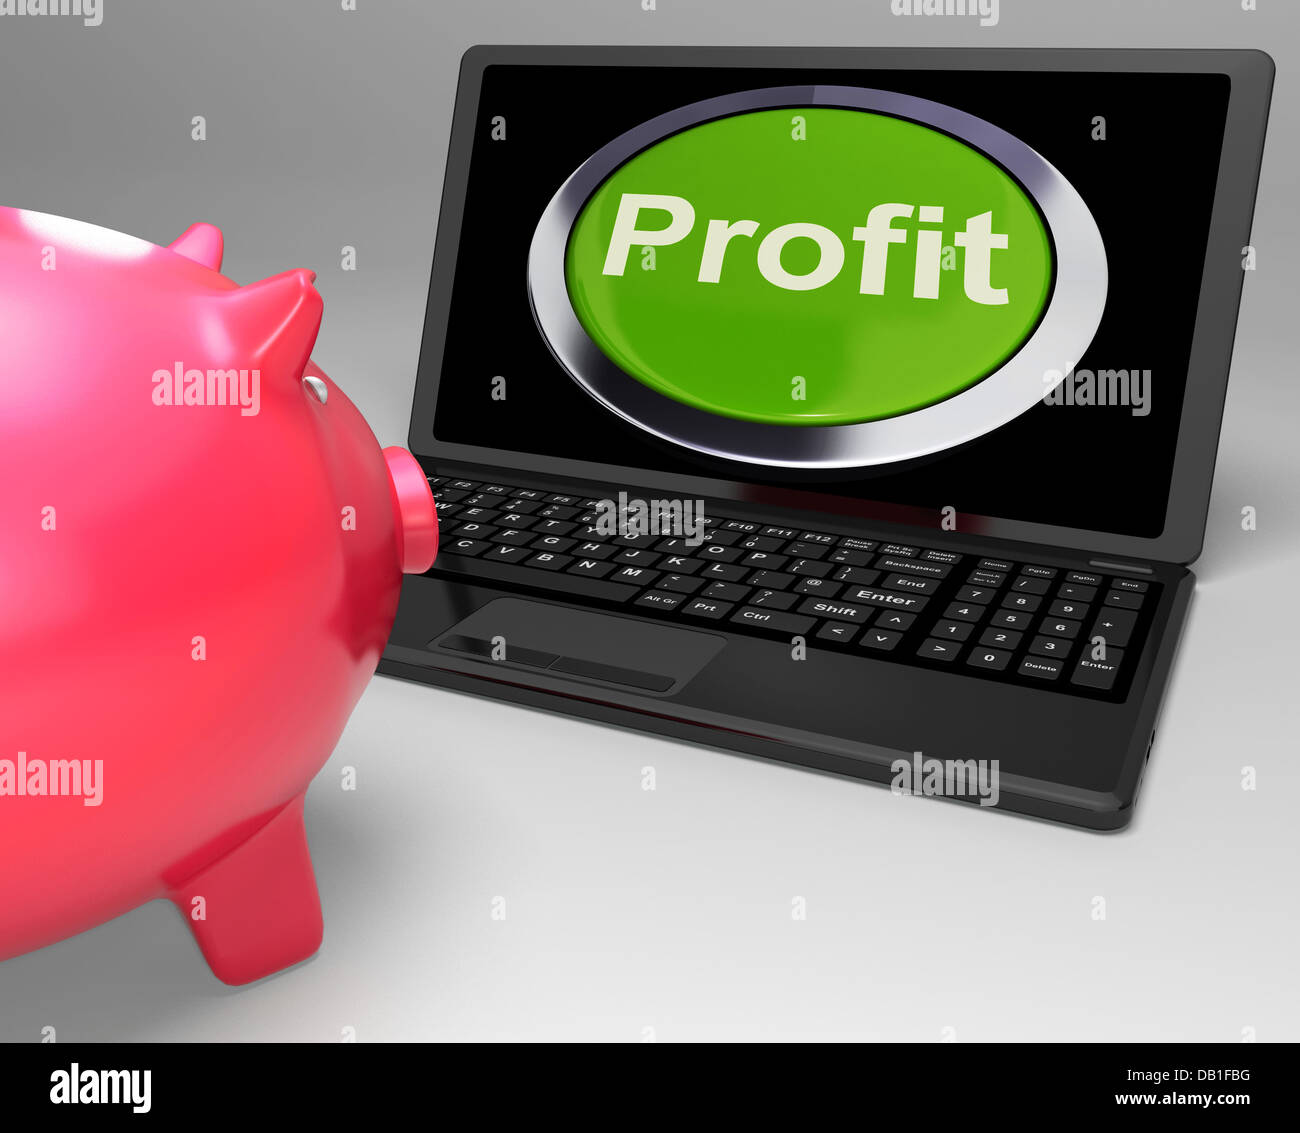 Profit Button On Laptop Shows Financial Growth Stock Photo